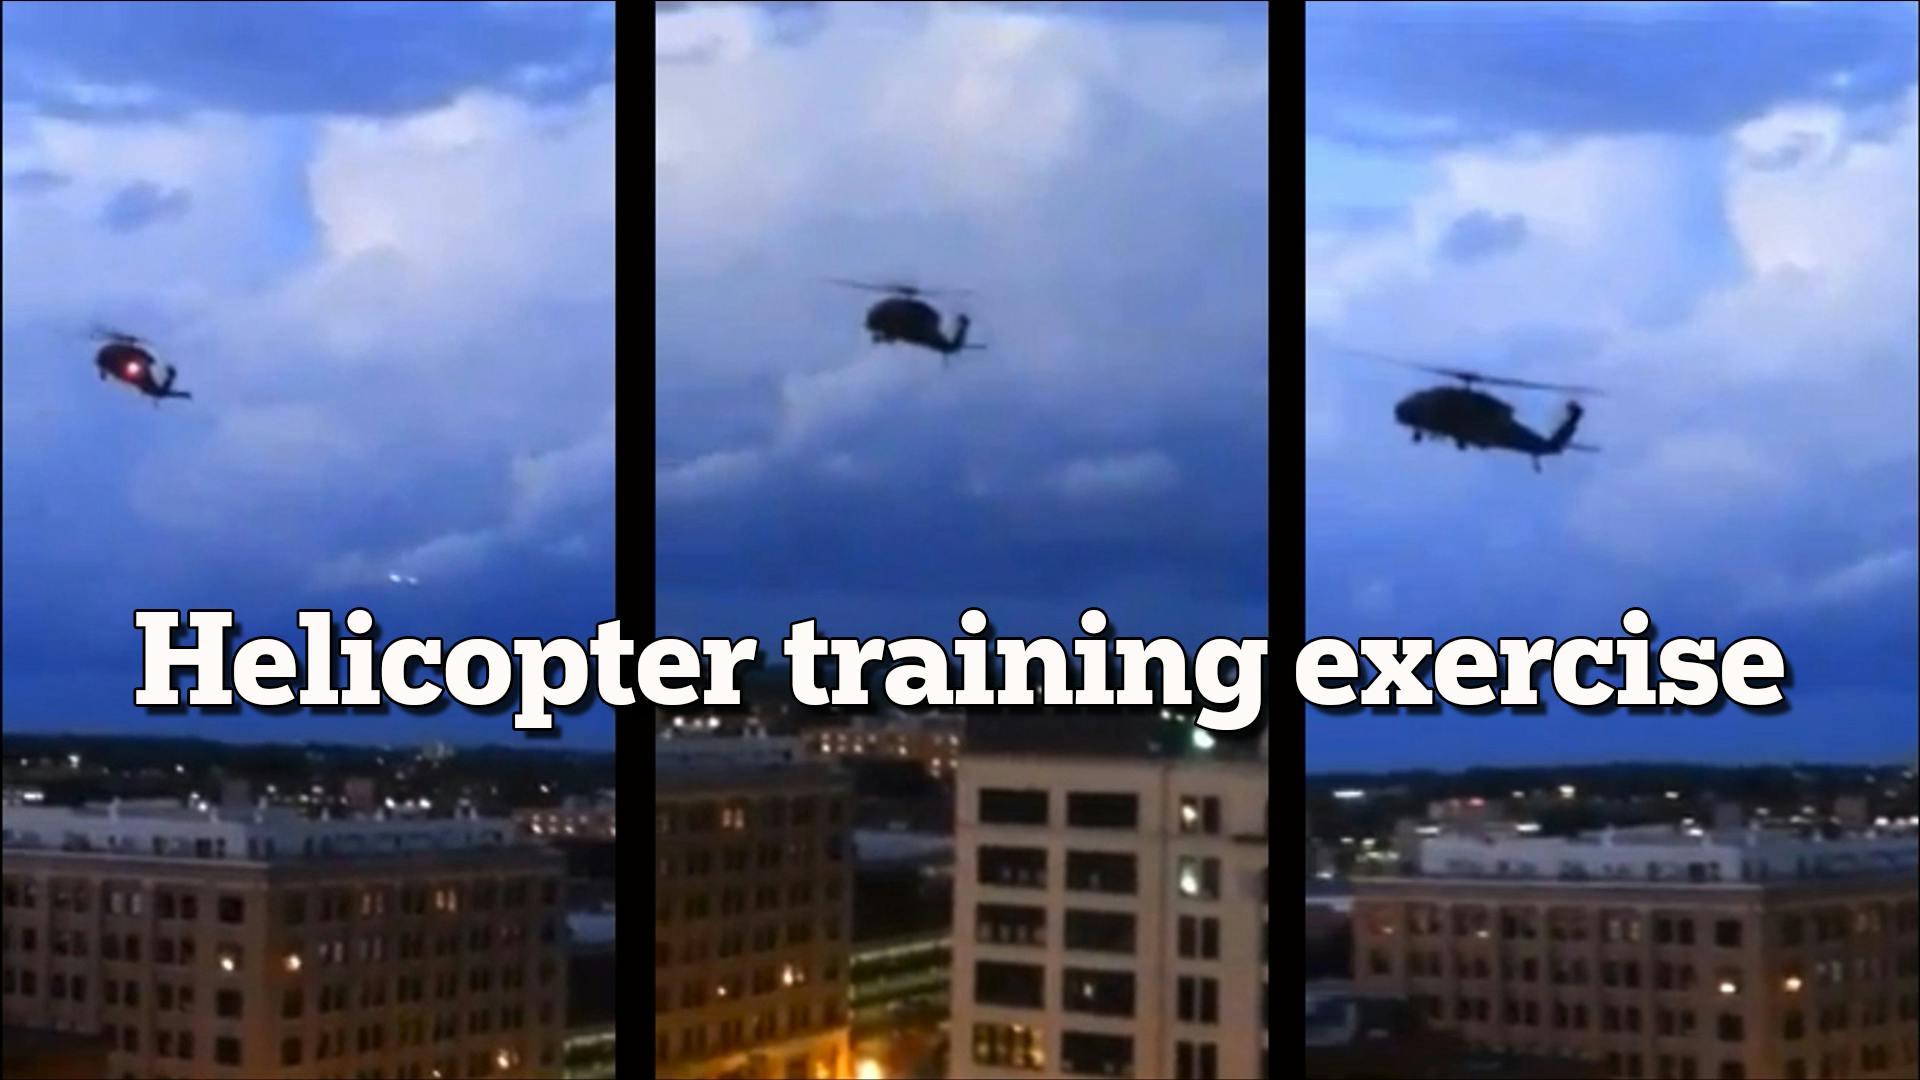 Loud, low-flying helicopters participating in a covert training mission startled people in the Twin Cities.